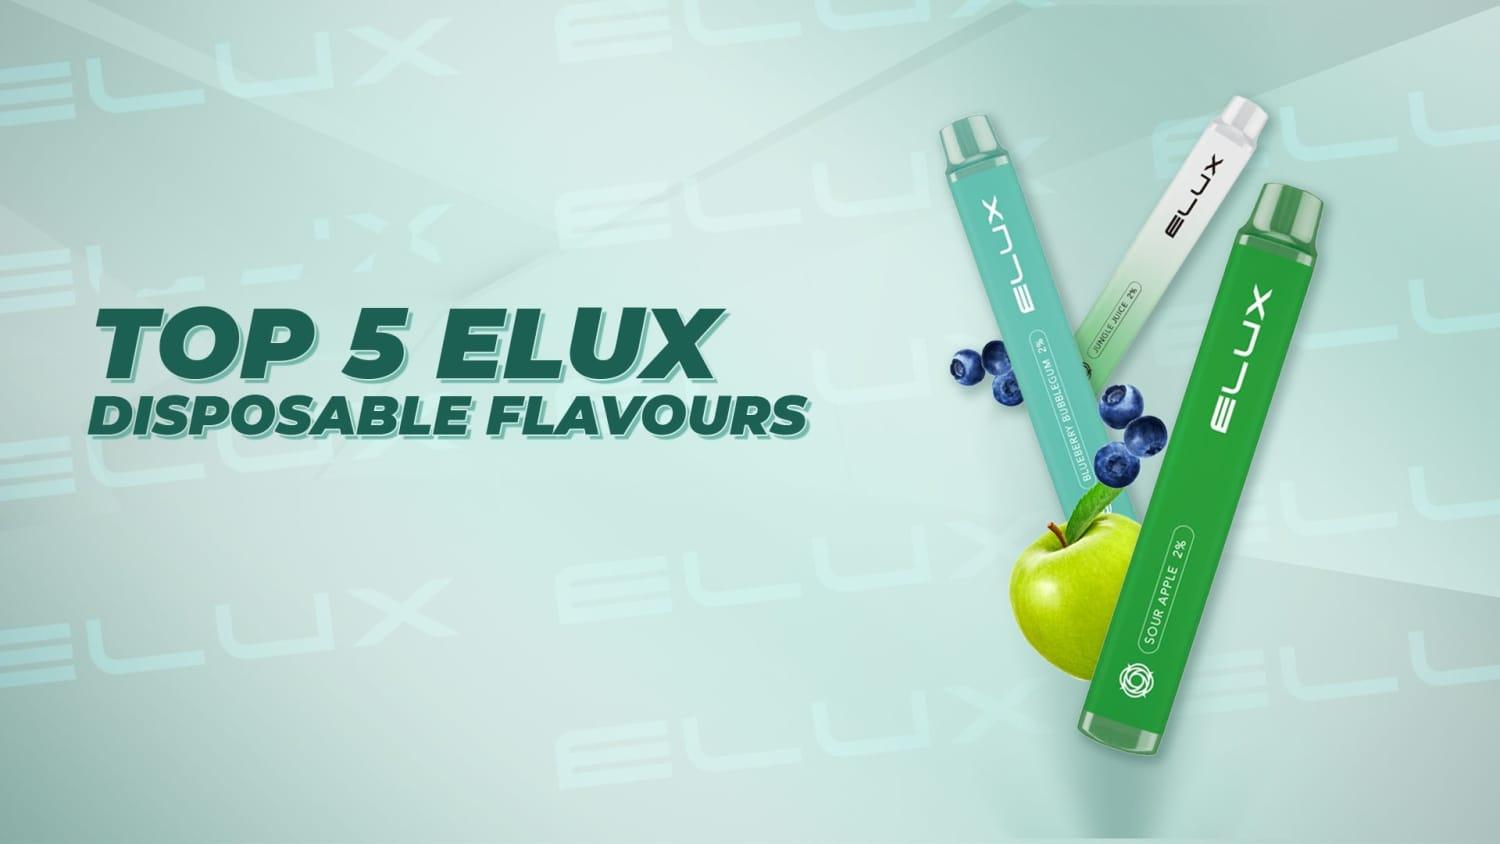 Top 5 Elux Disposable Vapes - Brand:Elux, Category:Vape Kits, Sub Category:Disposables